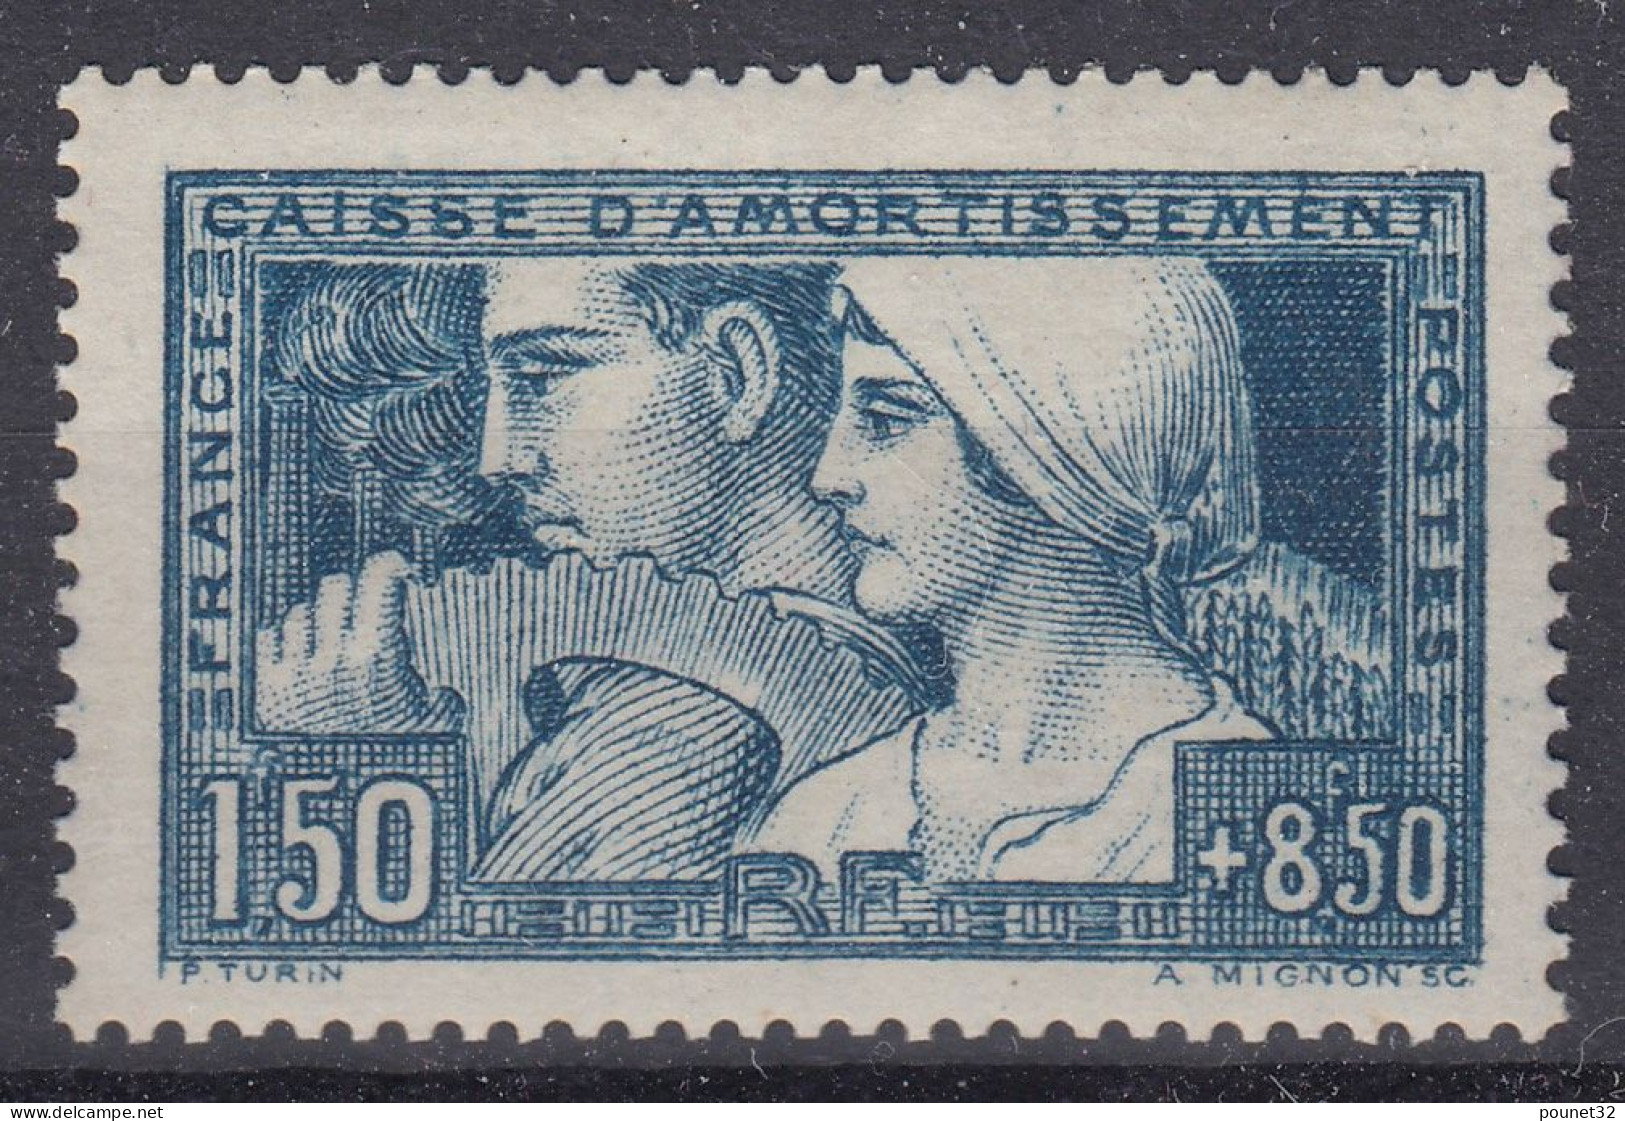 FRANCE CAISSE D'AMORTISSEMENT LE TRAVAIL N° 252 NEUF ** GOMME SANS CHARNIERE - COTE 260 € - 1927-31 Sinking Fund